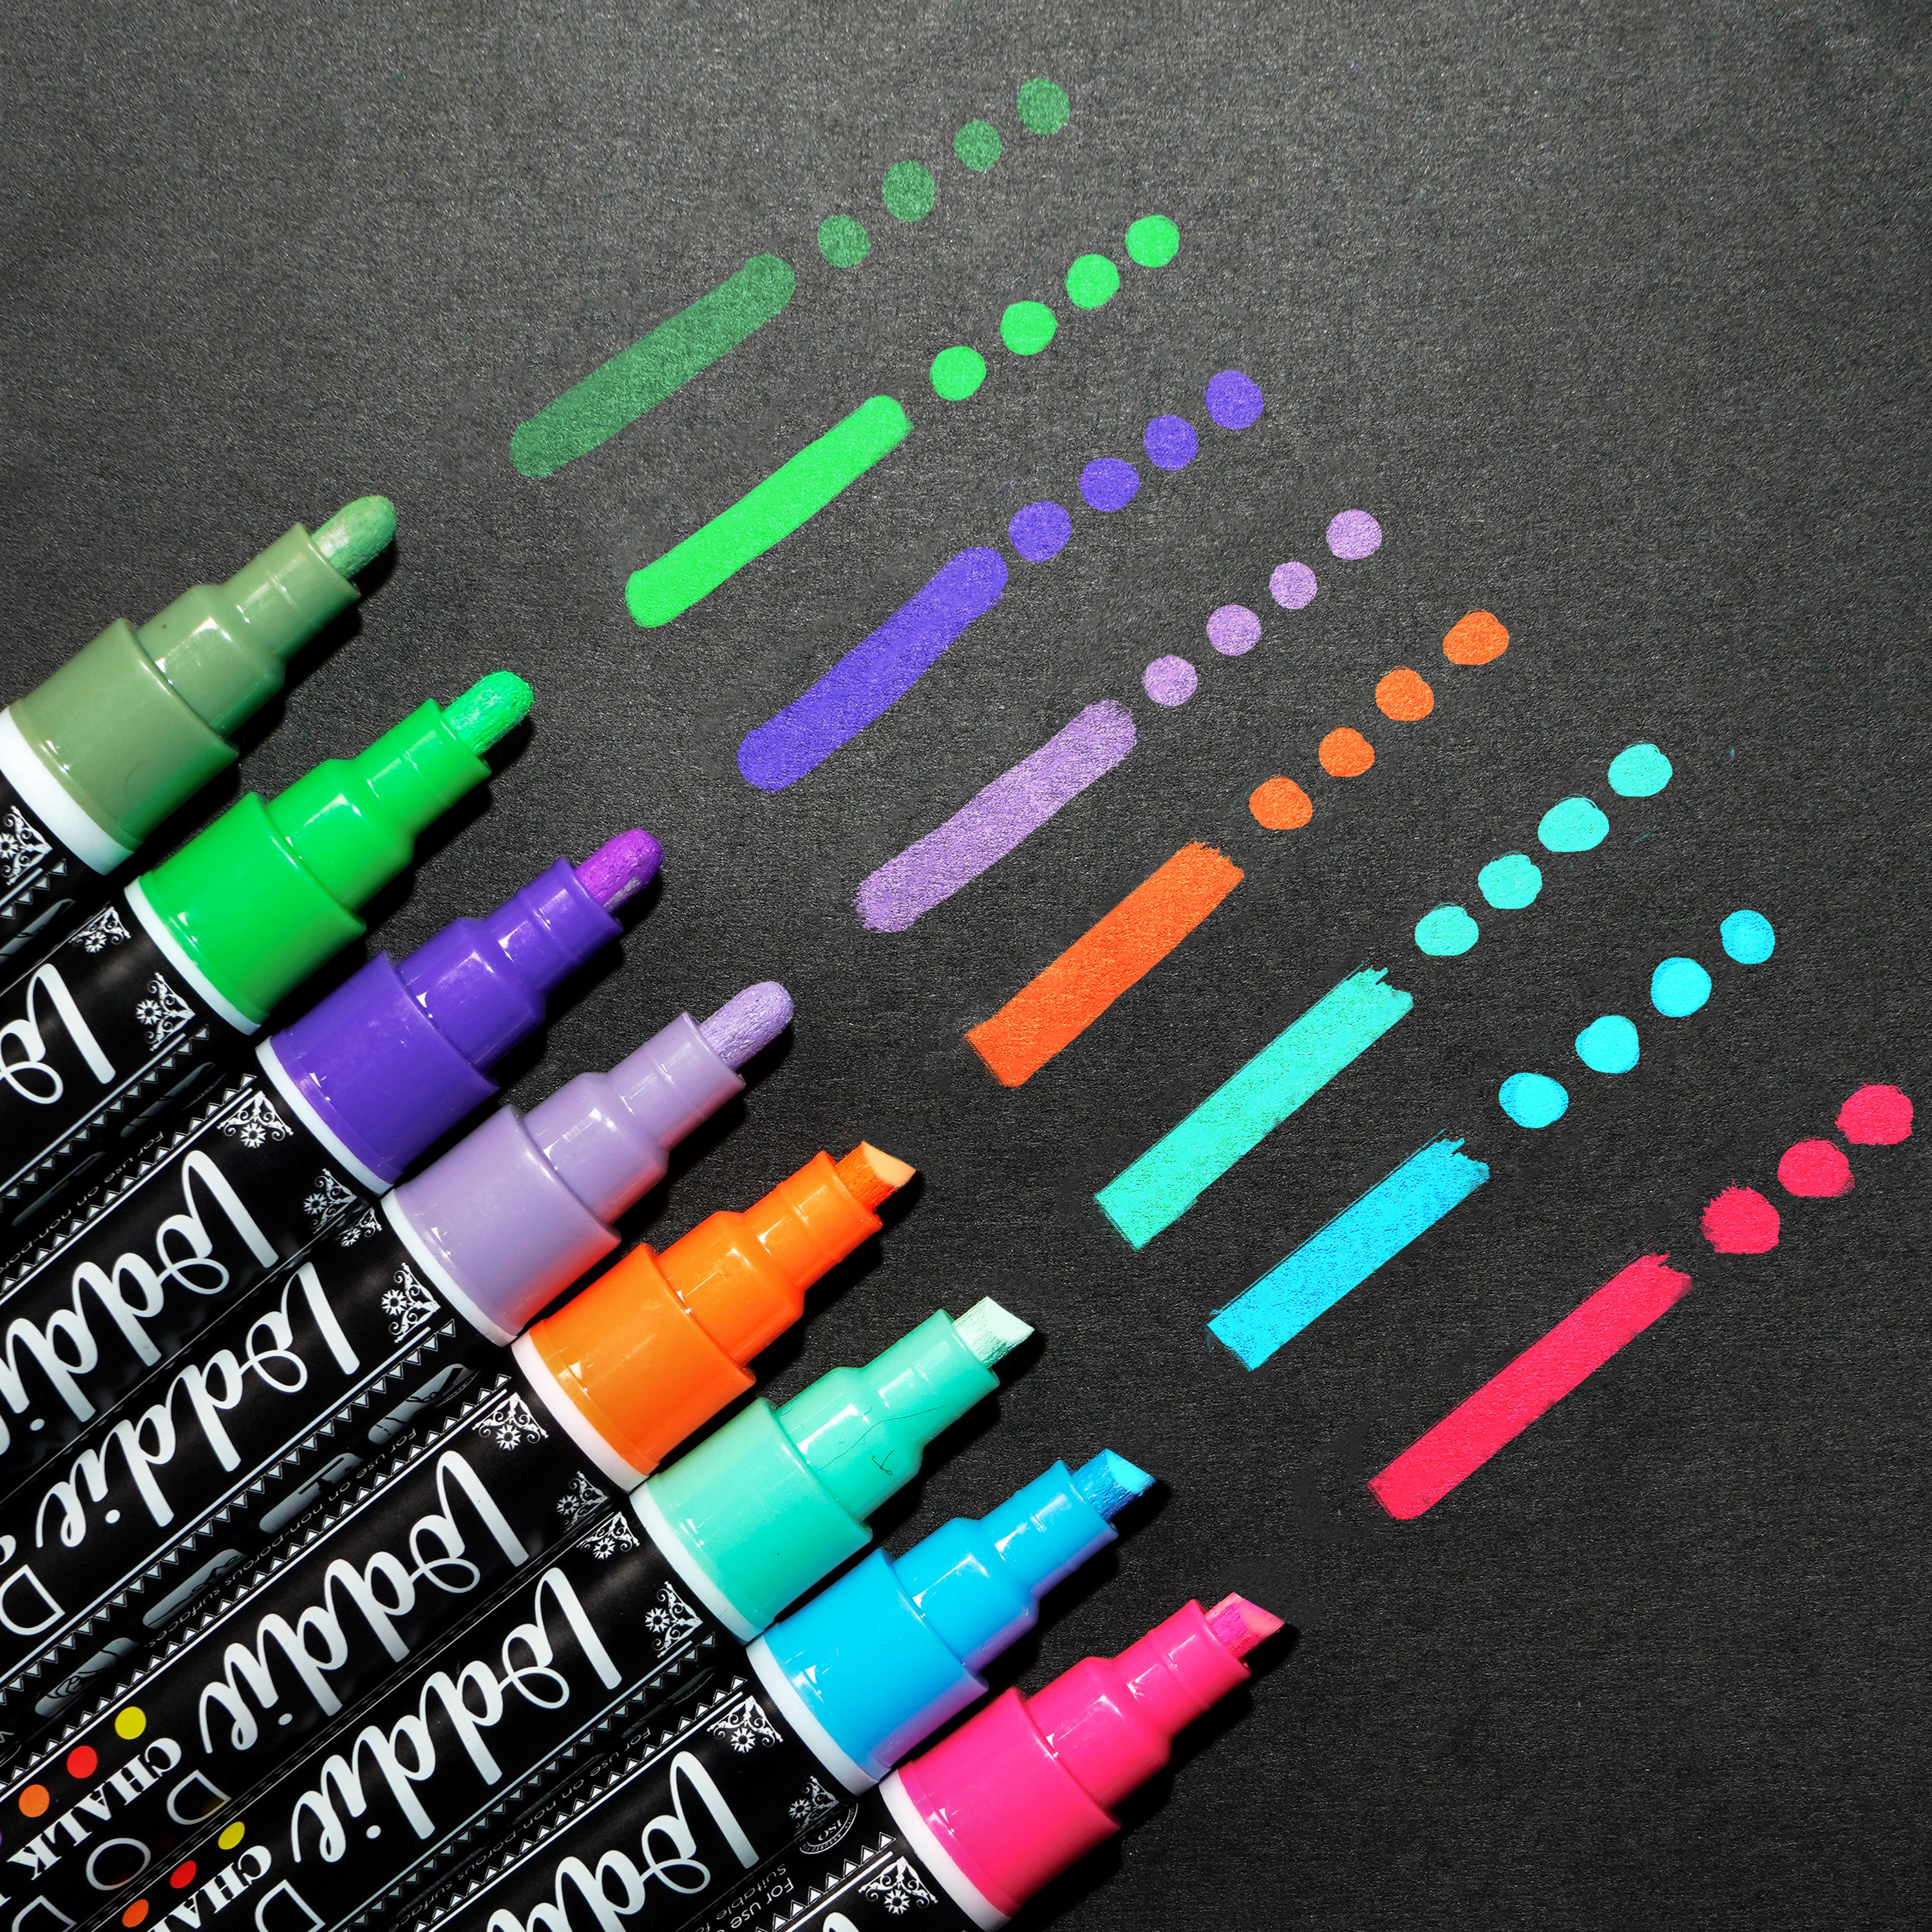 Loddie Doddie Liquid Chalk Markers | Dust Free Chalk Pens - Perfect for Chalkboards, Blackboards, Windows and Glass | 6mm Reversible Bullet & Chisel